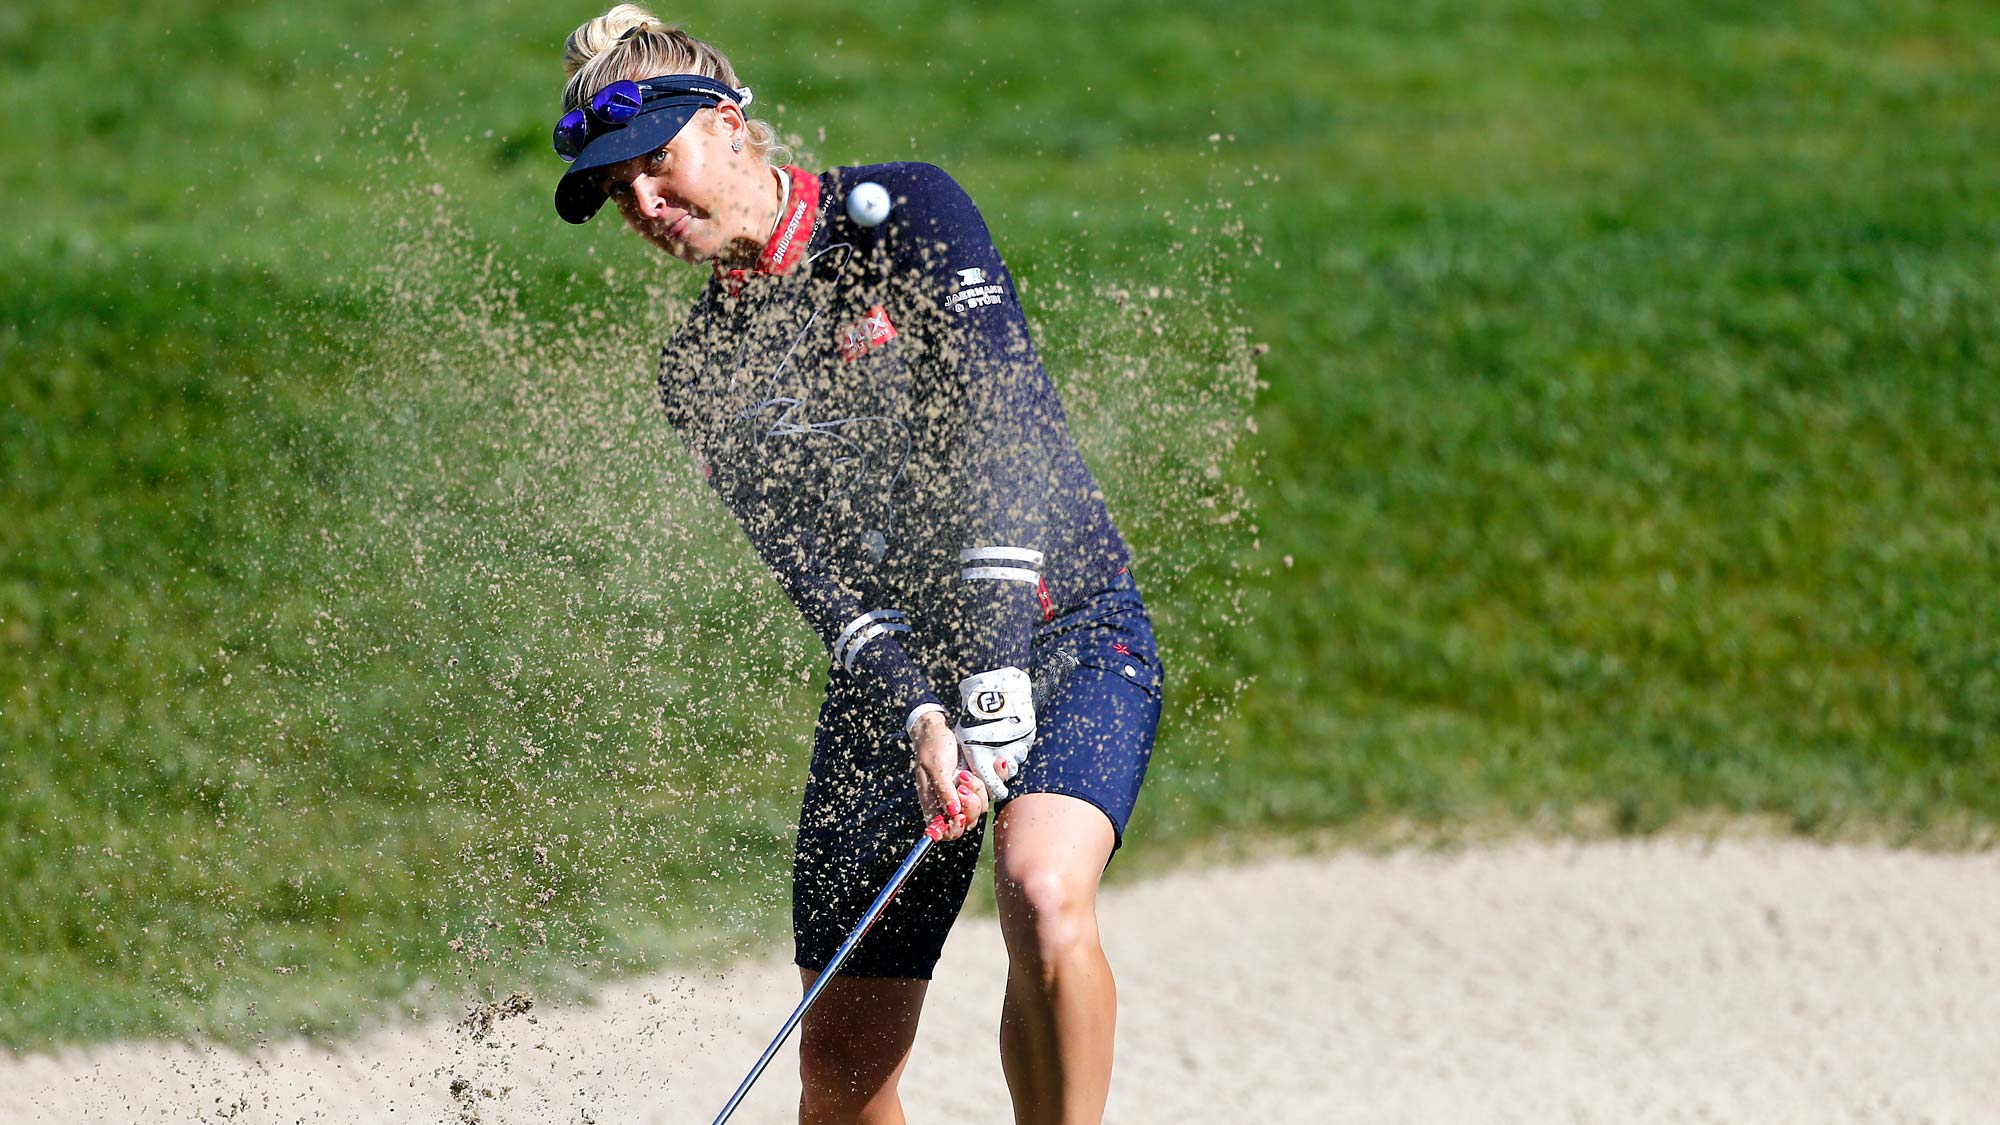 Charley Hull of England hits out of the bunker on the 18th hole during the first round of the LPGA Mediheal Championship